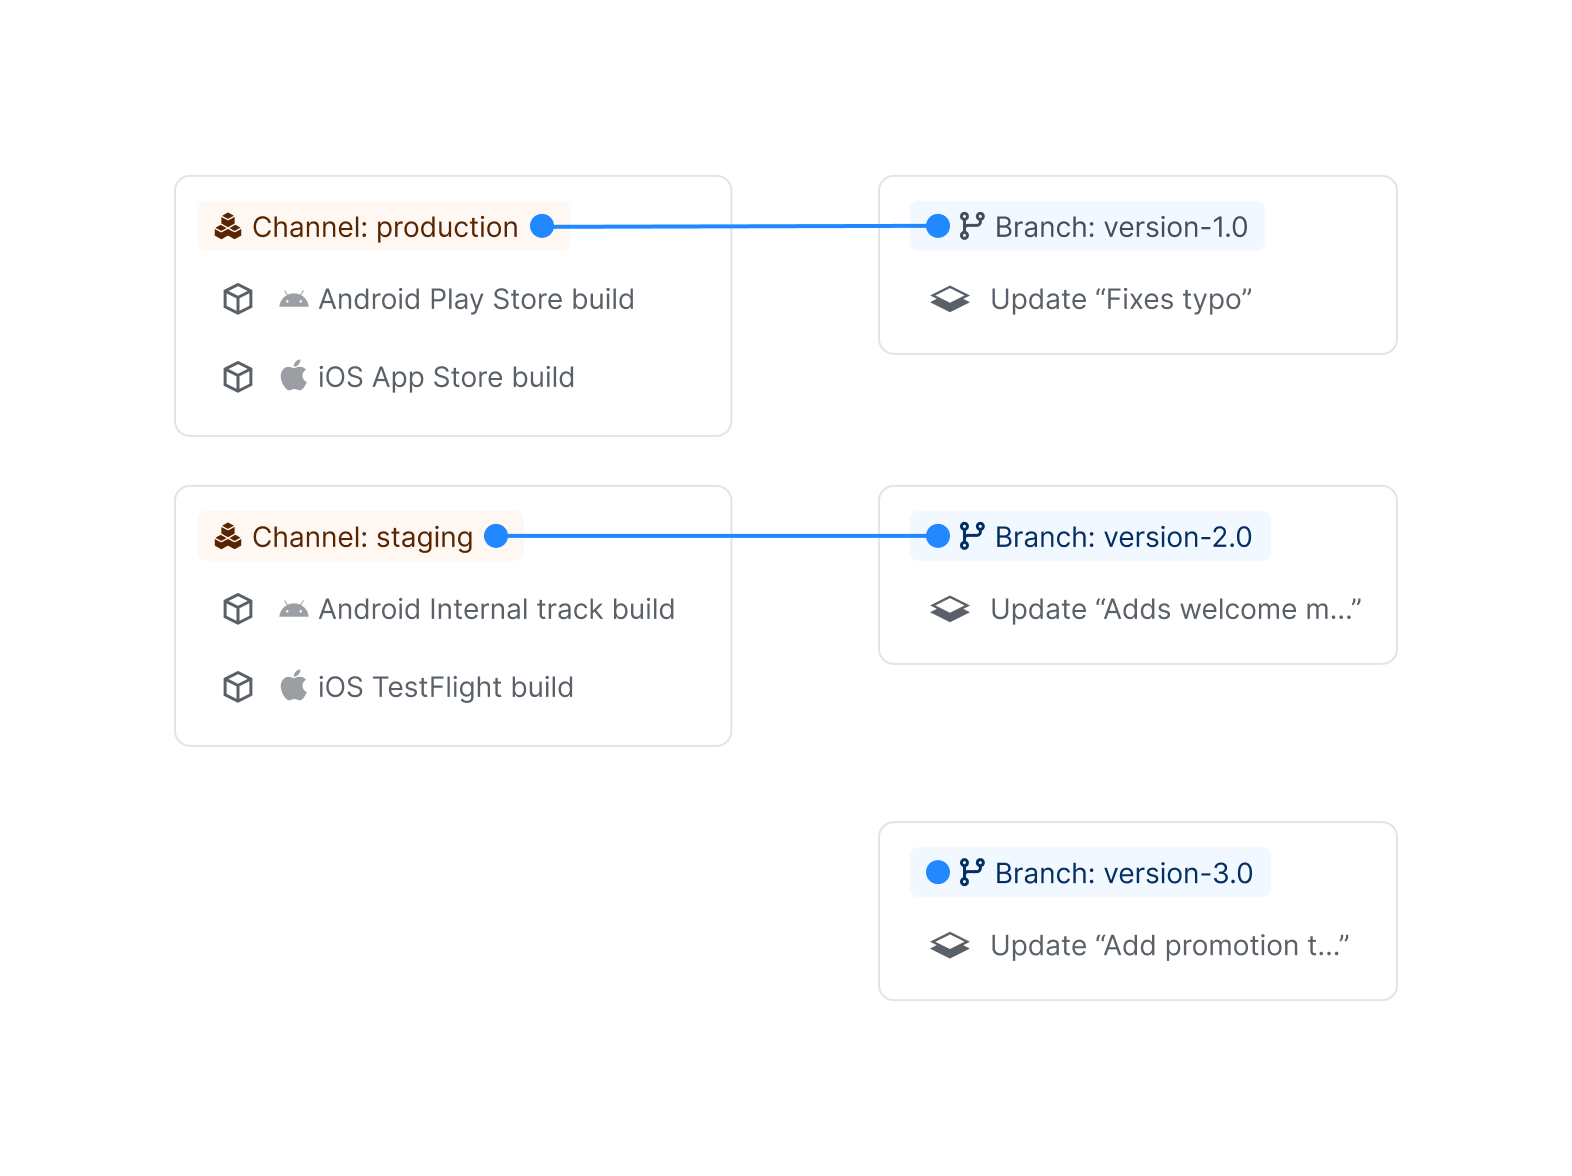 Channel "production" linked to branch "version-1.0", channel "staging" linked to branch "version-2.0"